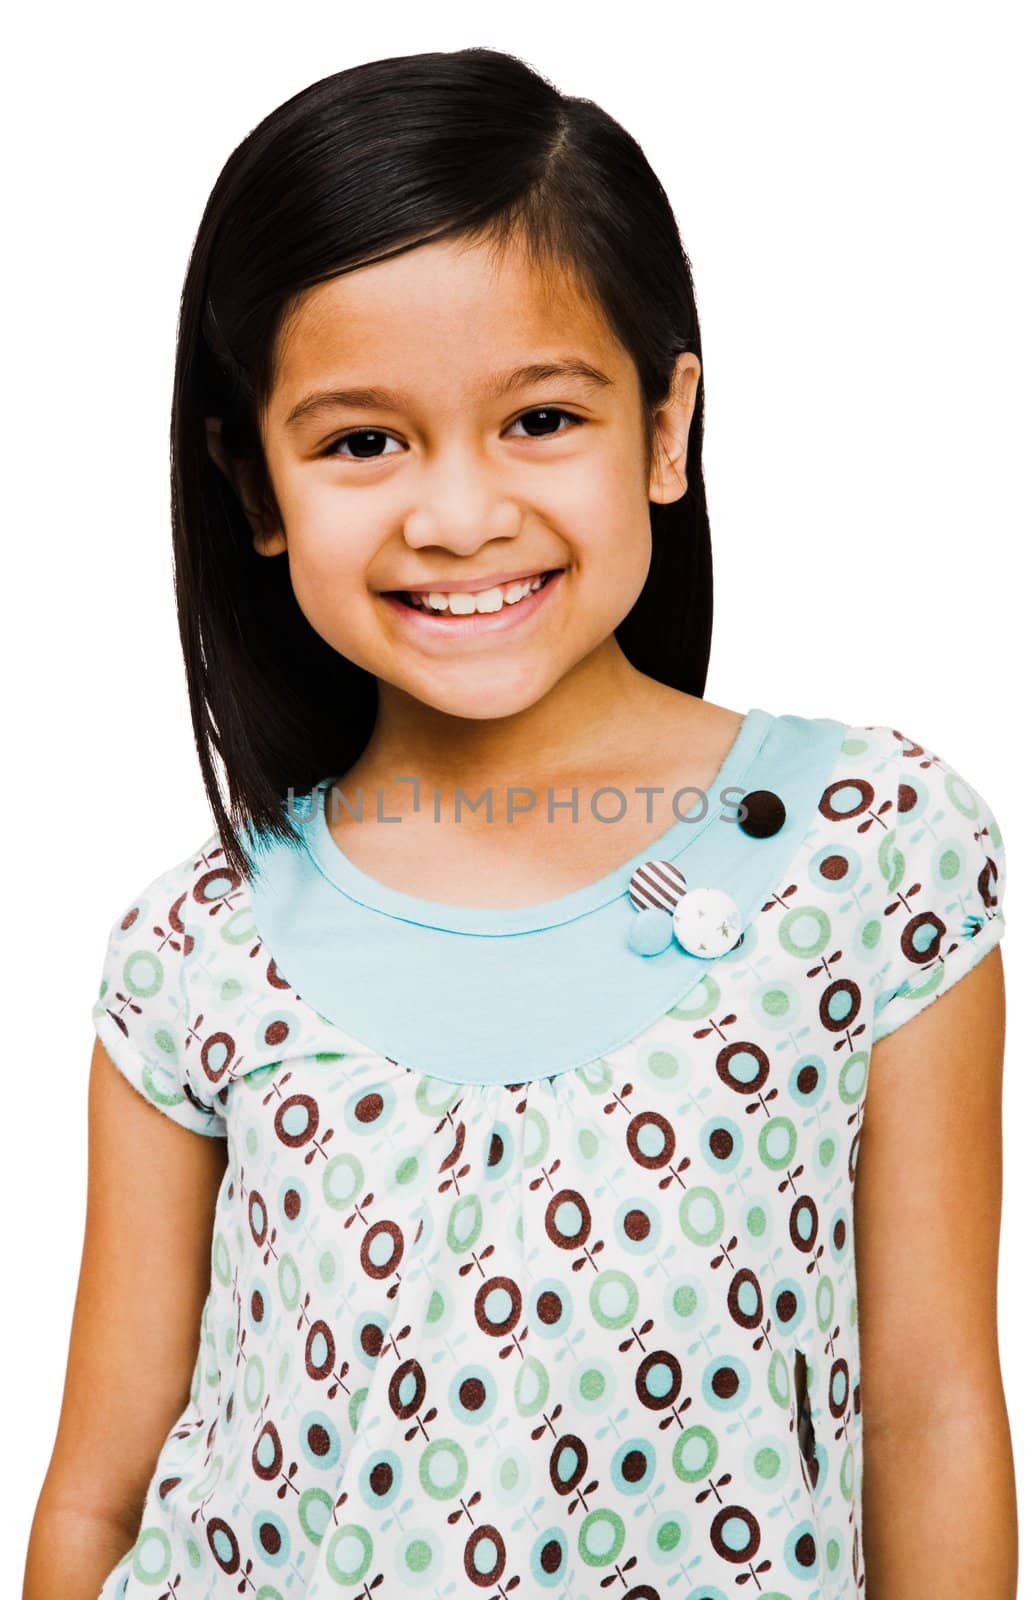 Asian girl smiling and posing isolated over white